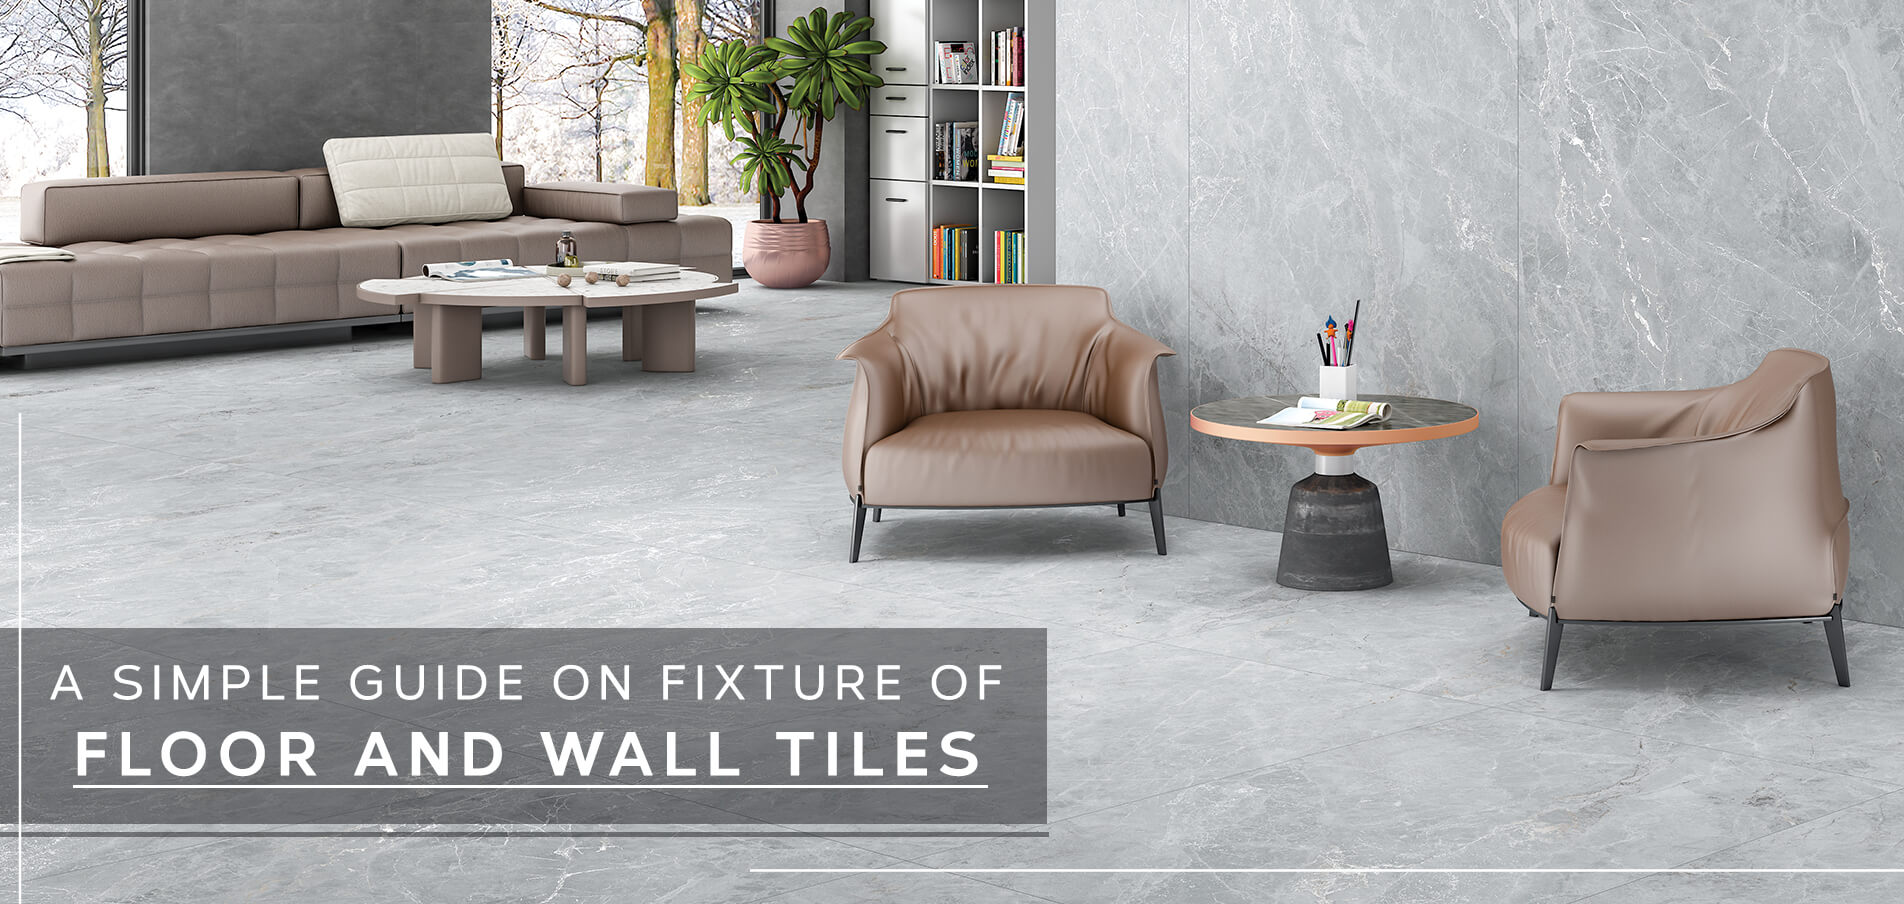 A Simple Guide to the Fixture of Floor and Wall Tiles